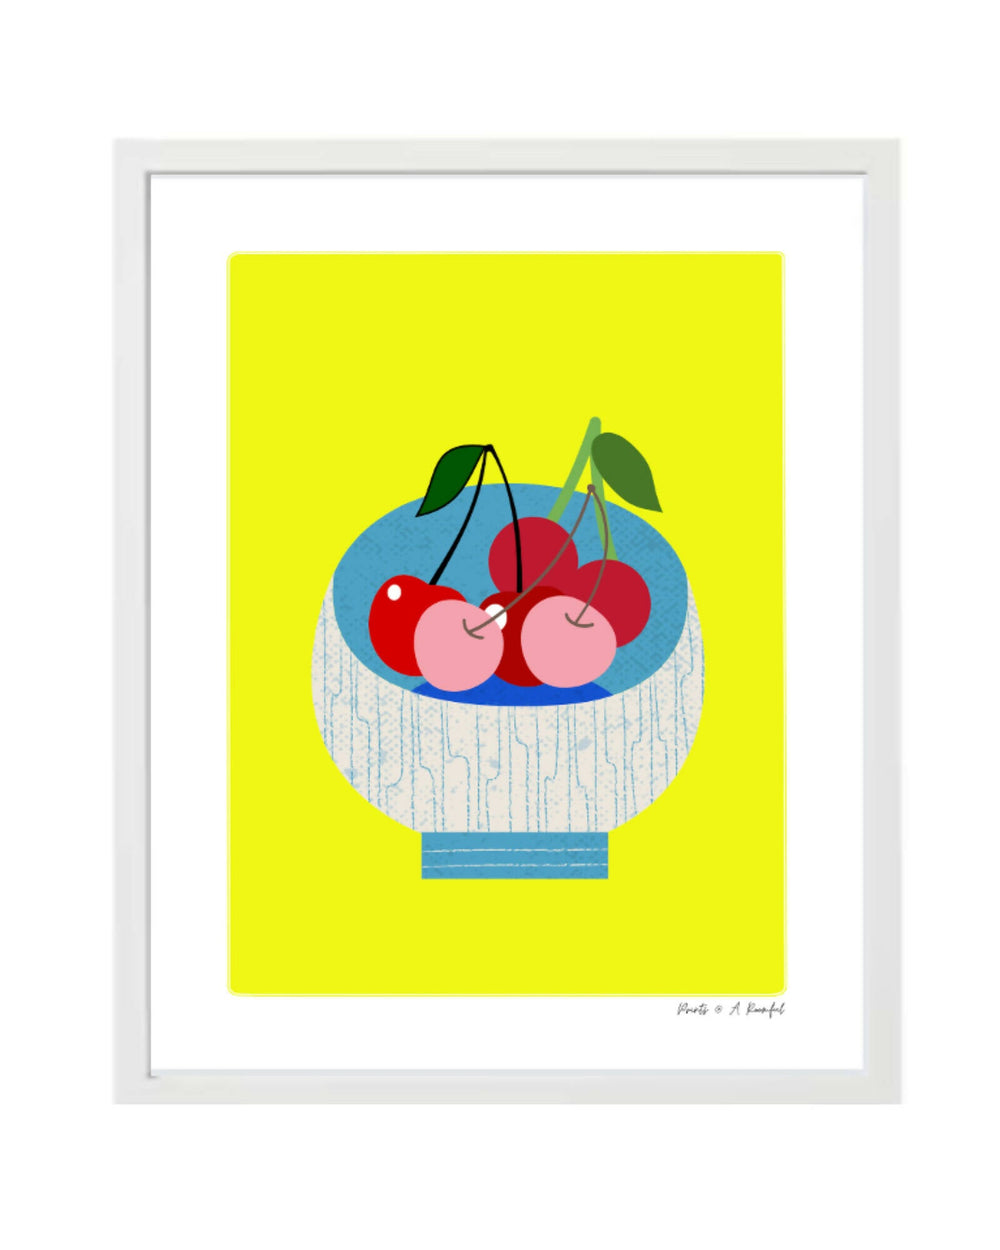 wall art : Iispired by colours and fruits (cherries) Art Prints@ARoomful 40cm x 50cm 